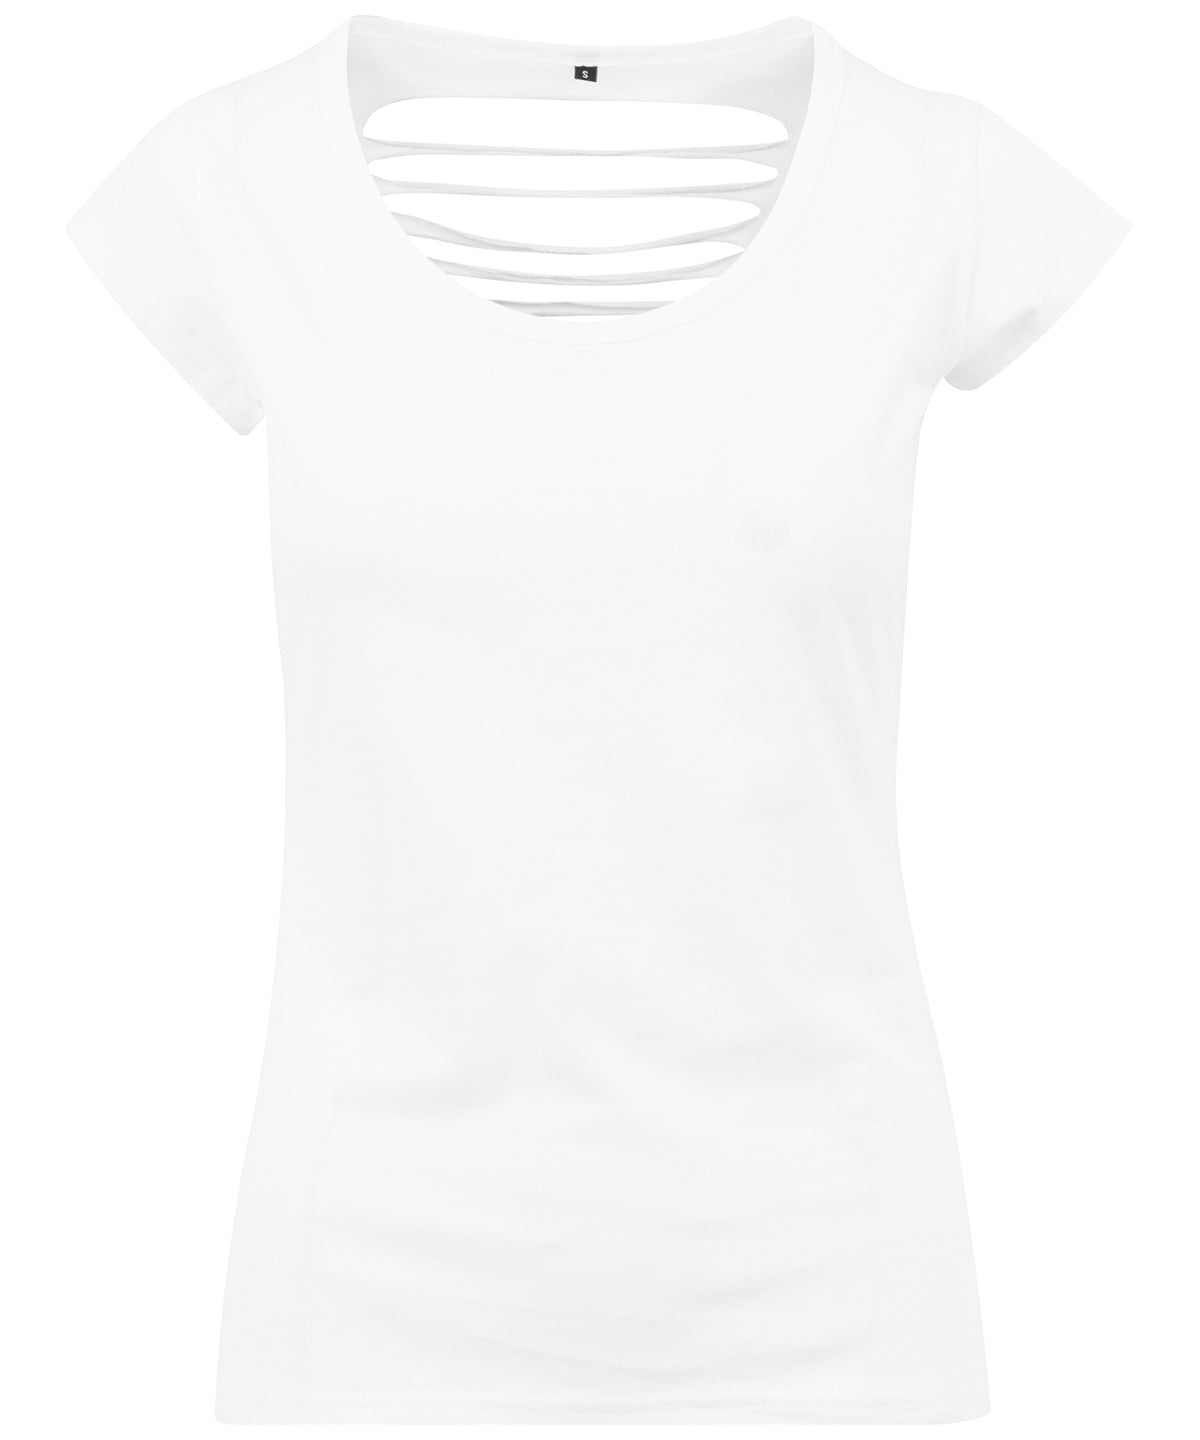 Build Your Brand Womens Back Cut Tee